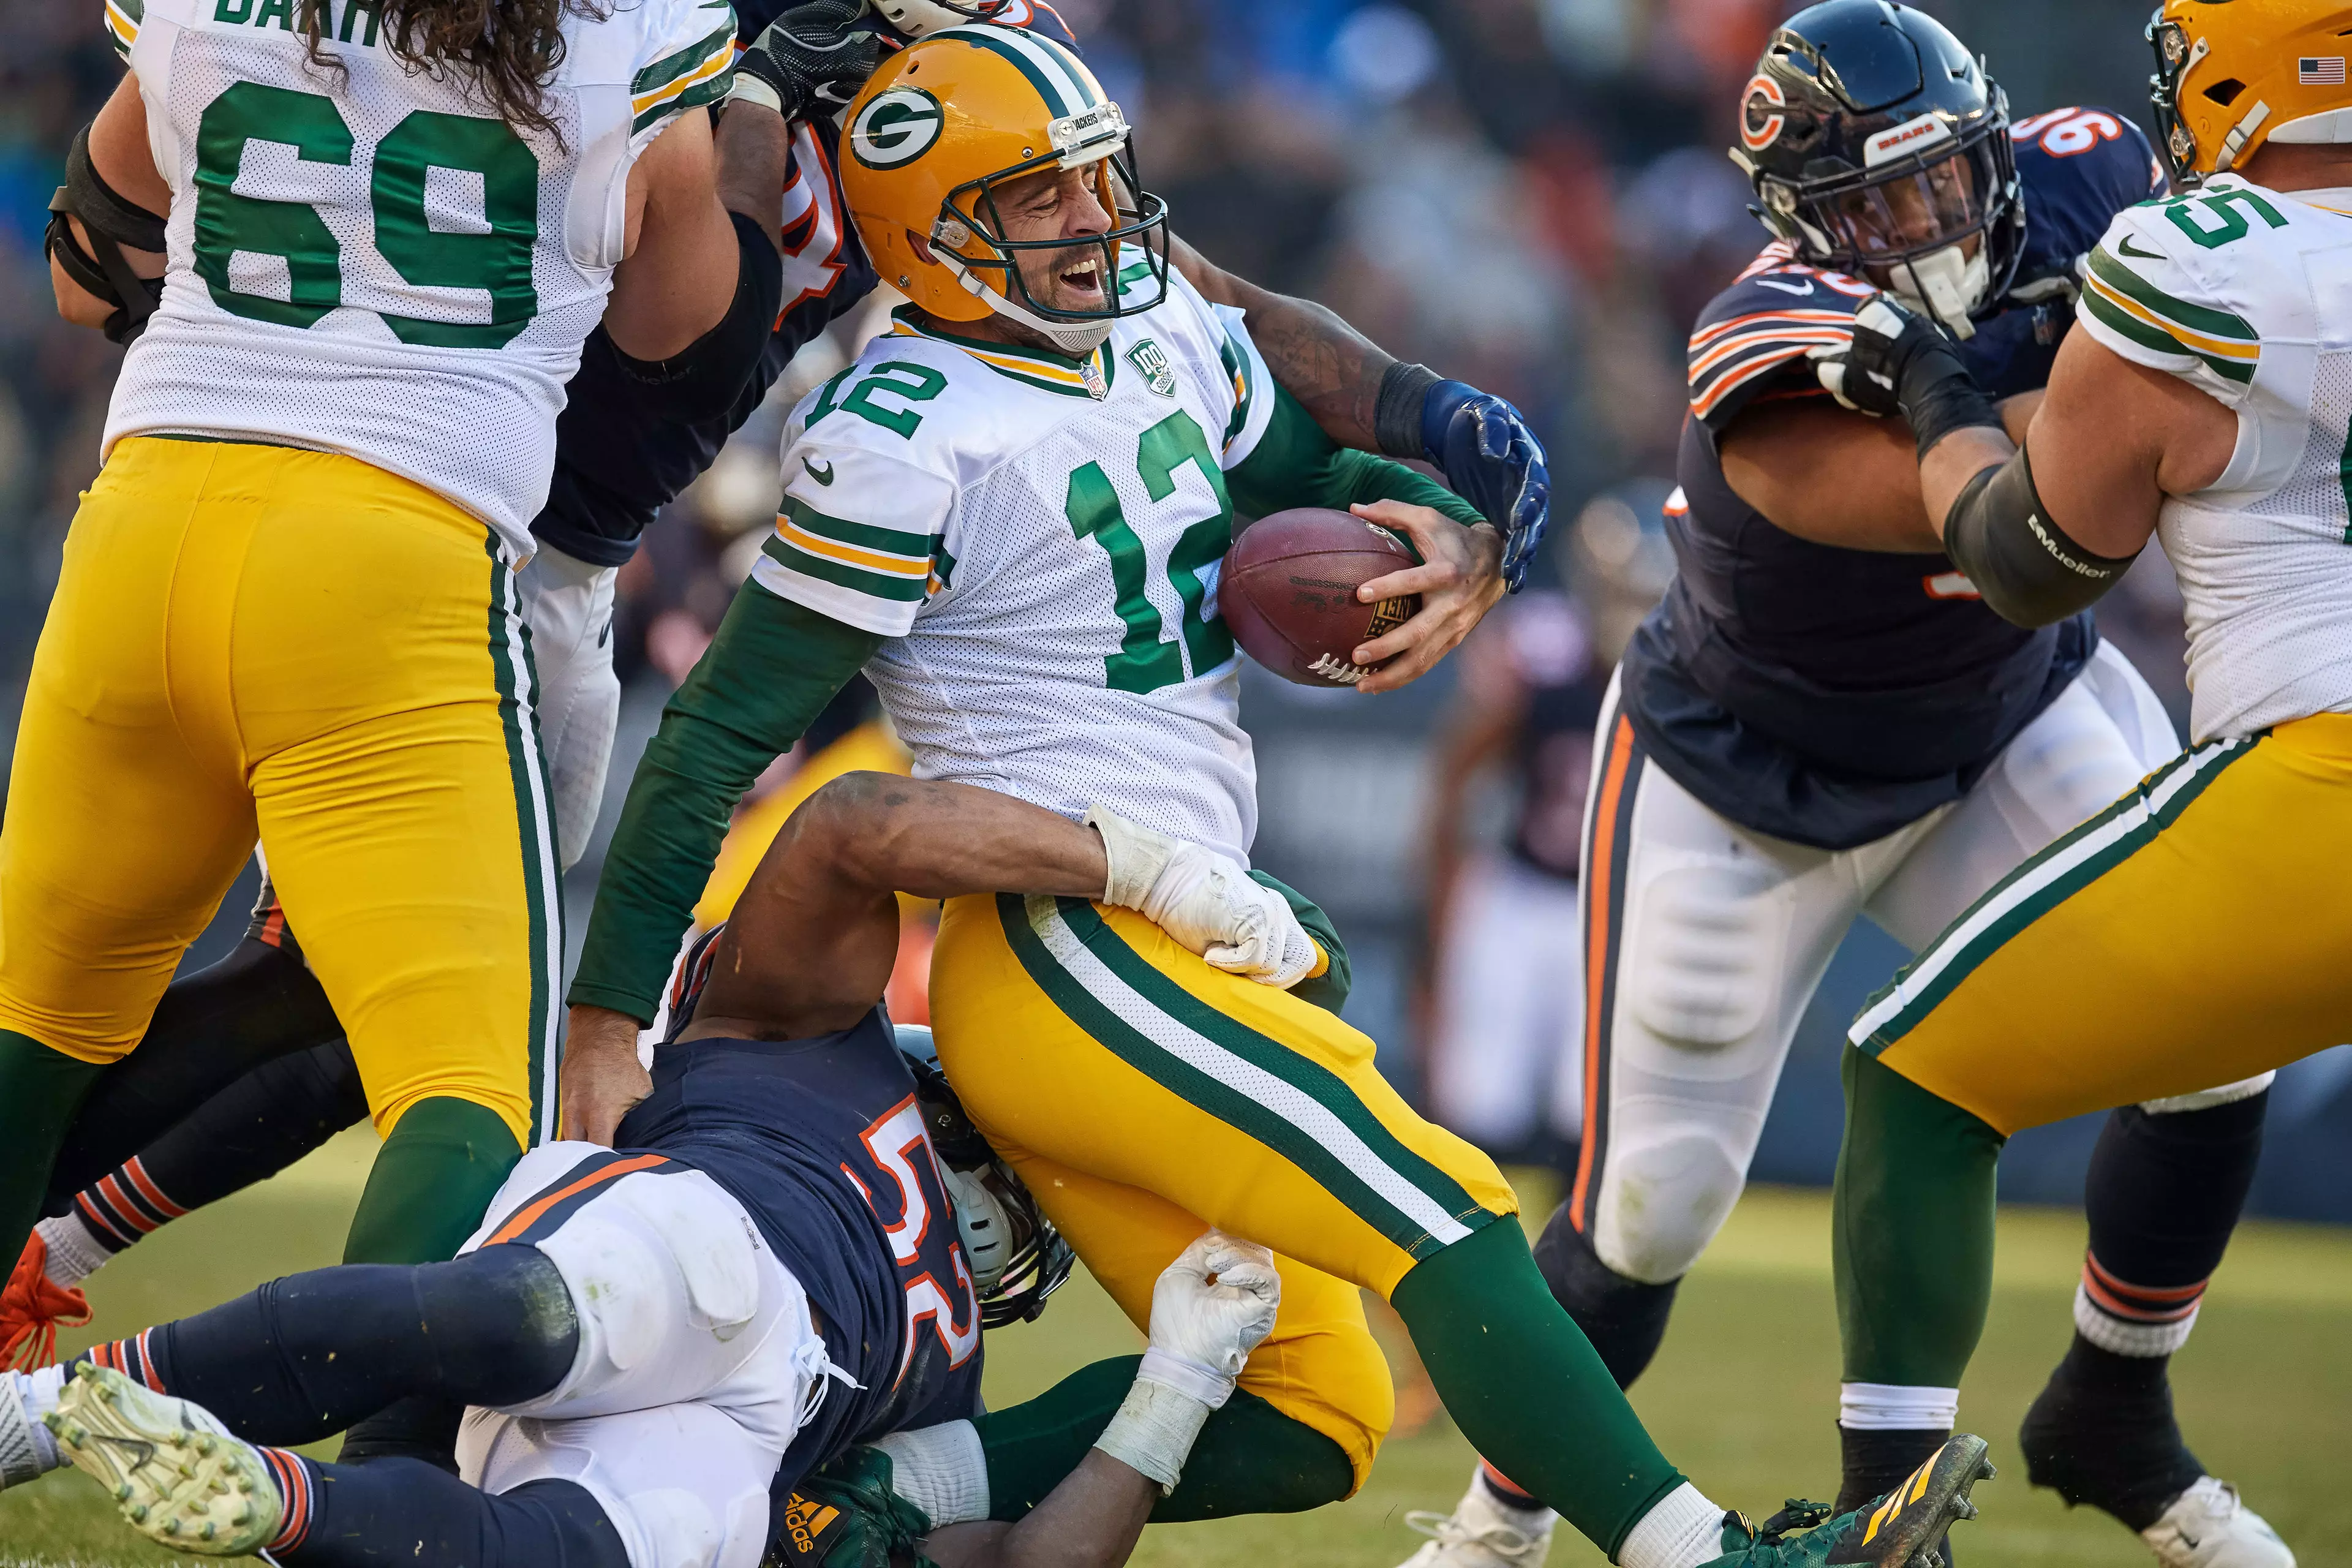 Khalil Mack (52) sacks Aaron Rodgers during Chicago's clash with Green Bay in December